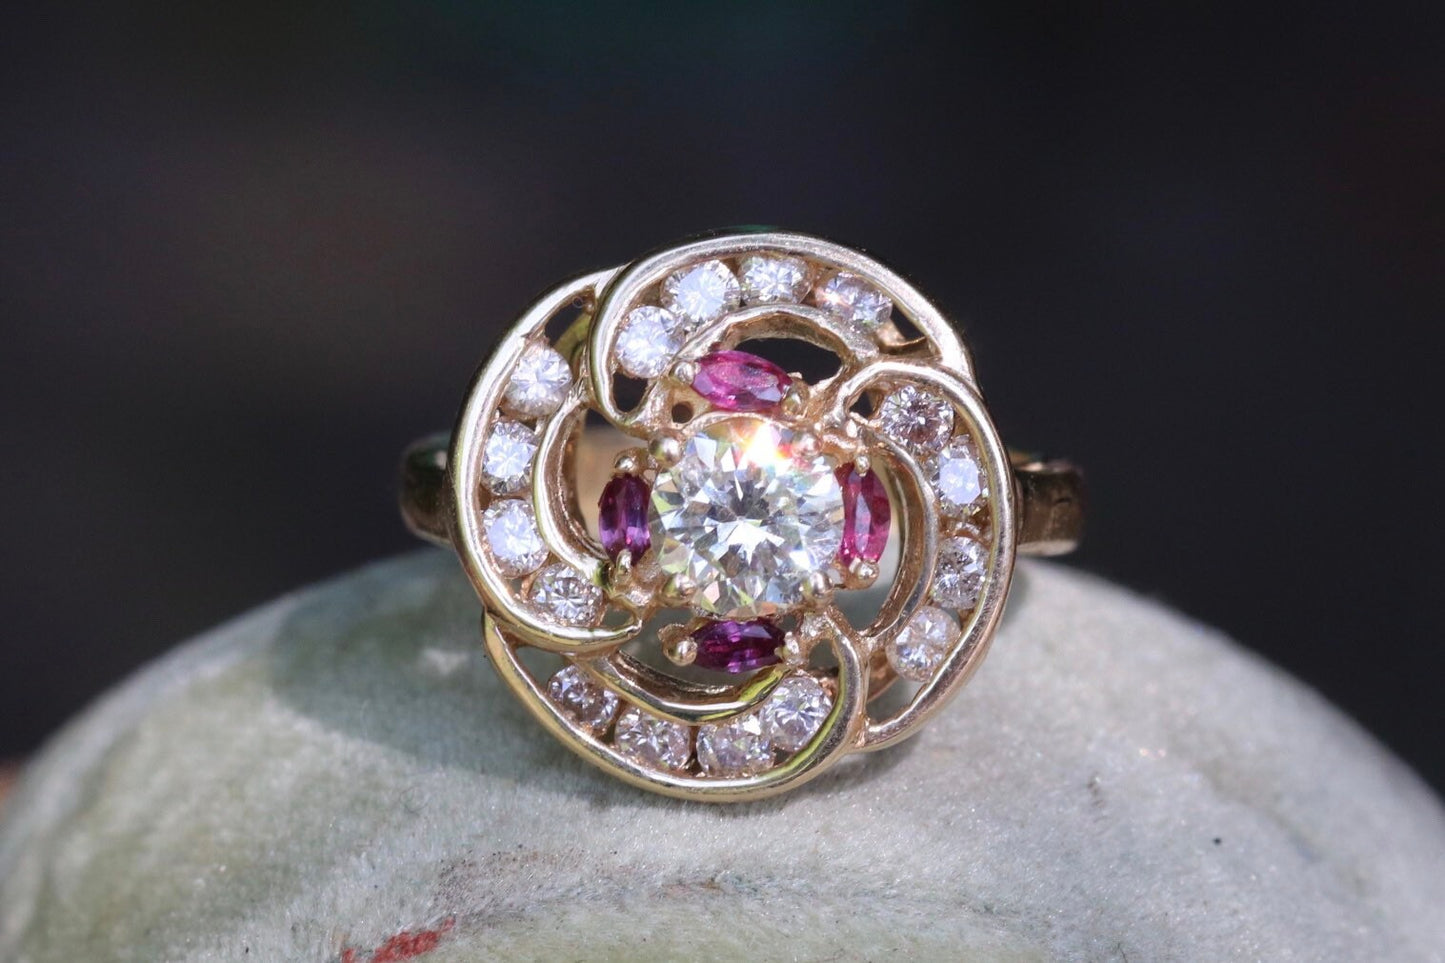 Transitional cut diamond set in 14k yellow gold surrounded by rubies and modern round diamonds size 5.75 (sizable)